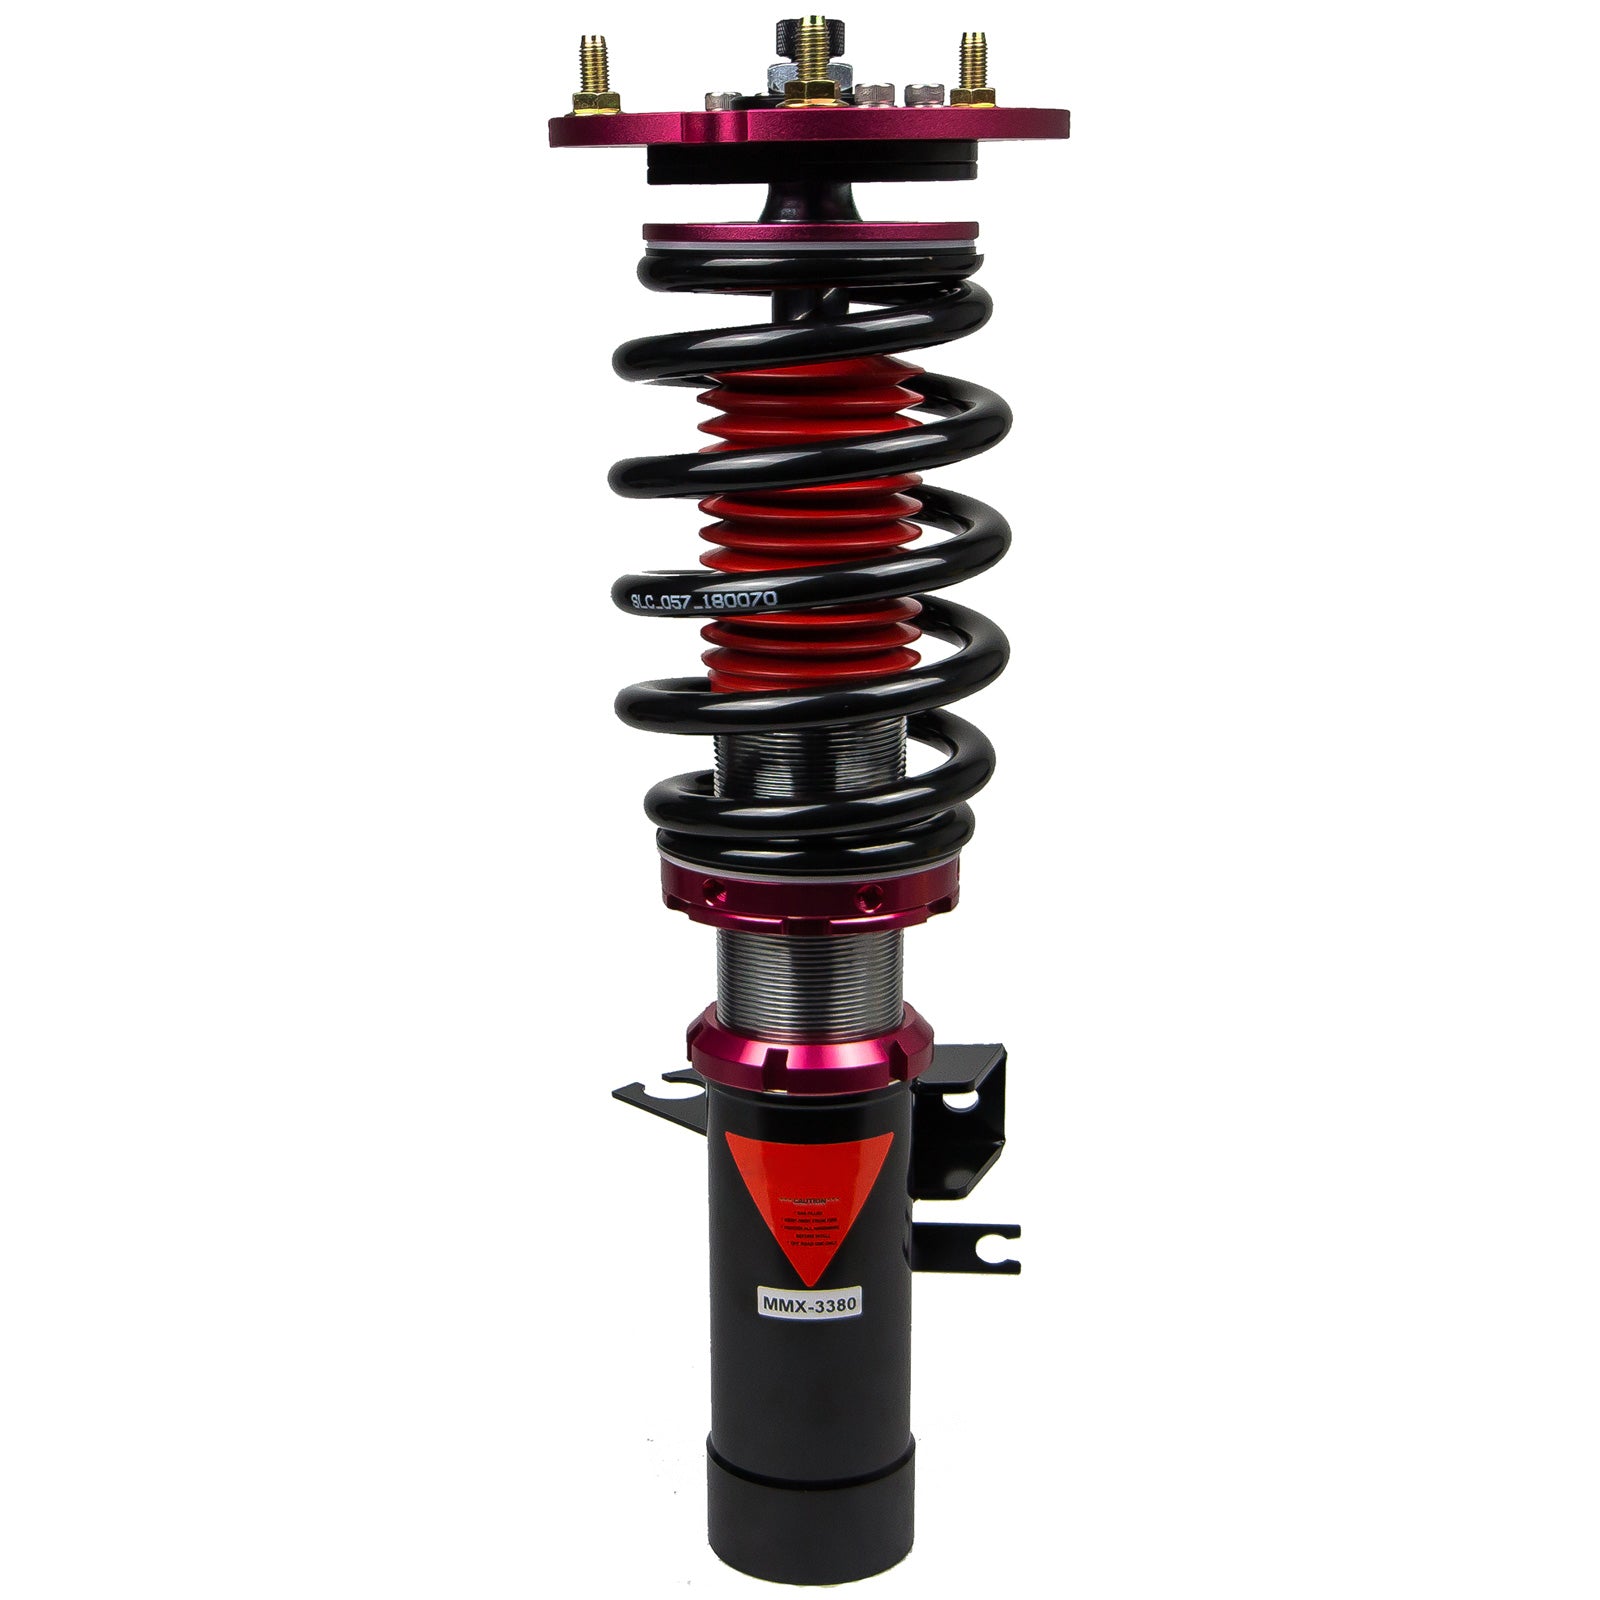 MMX3380 MAXX Coilovers Lowering Kit, Fully Adjustable, Ride Height, 40 Clicks Rebound Settings, BMW 5-Series(E34) 87-95